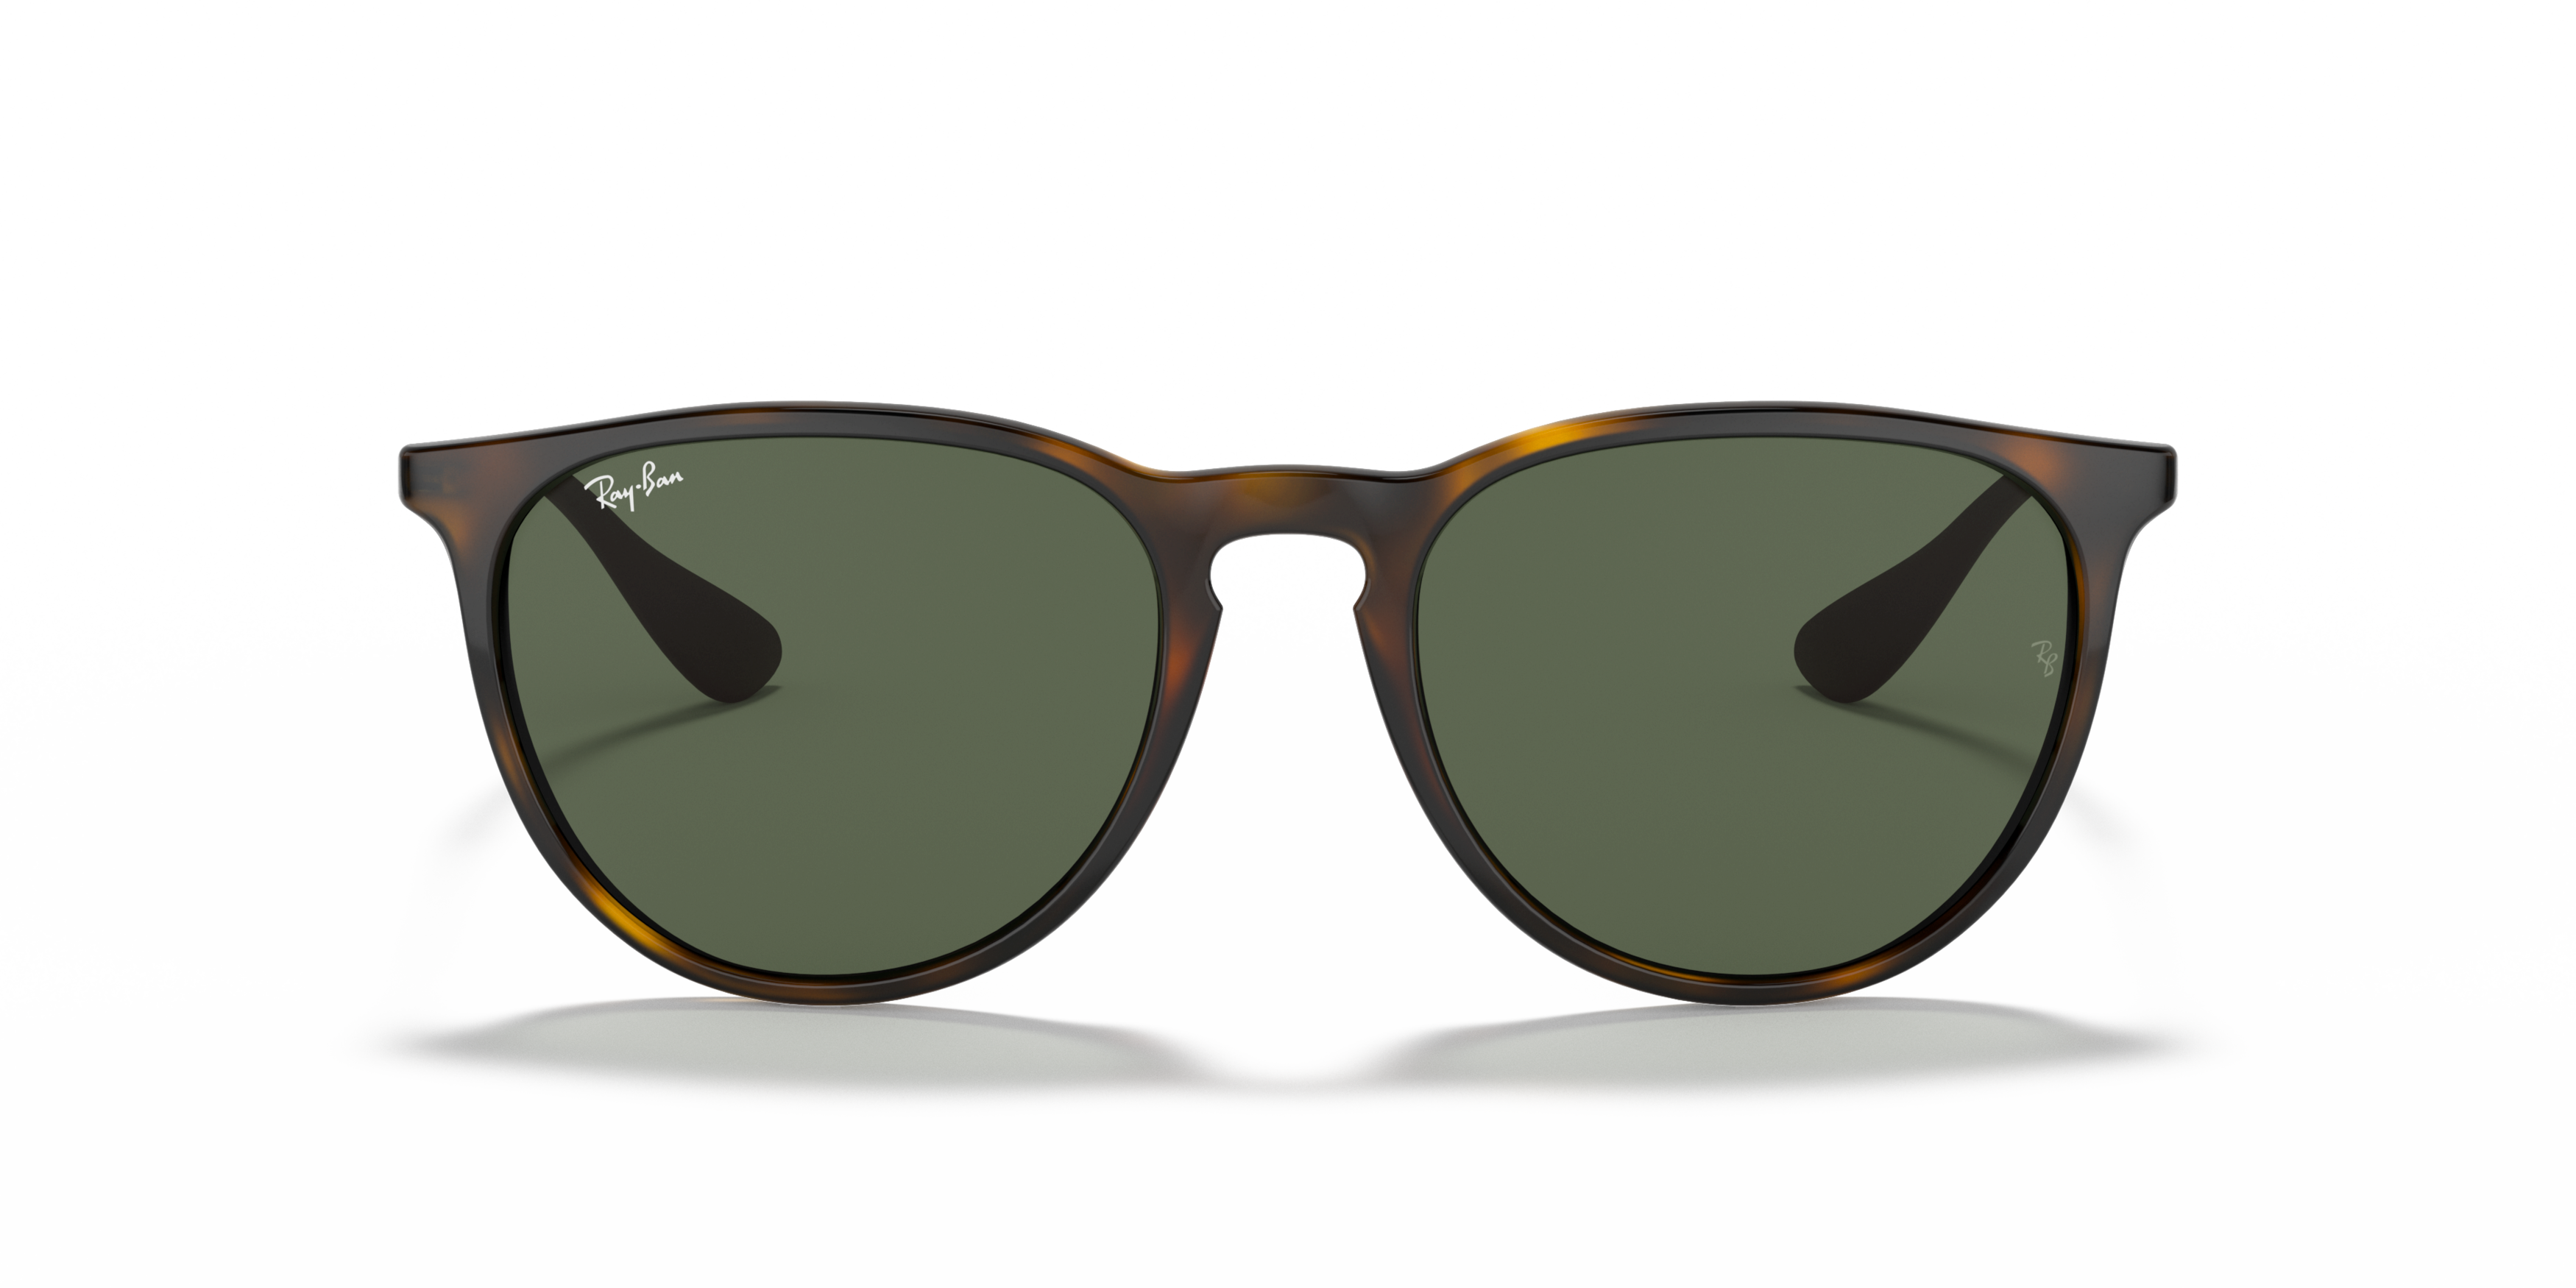 [products.image.front] RAY-BAN RB4171 710/71